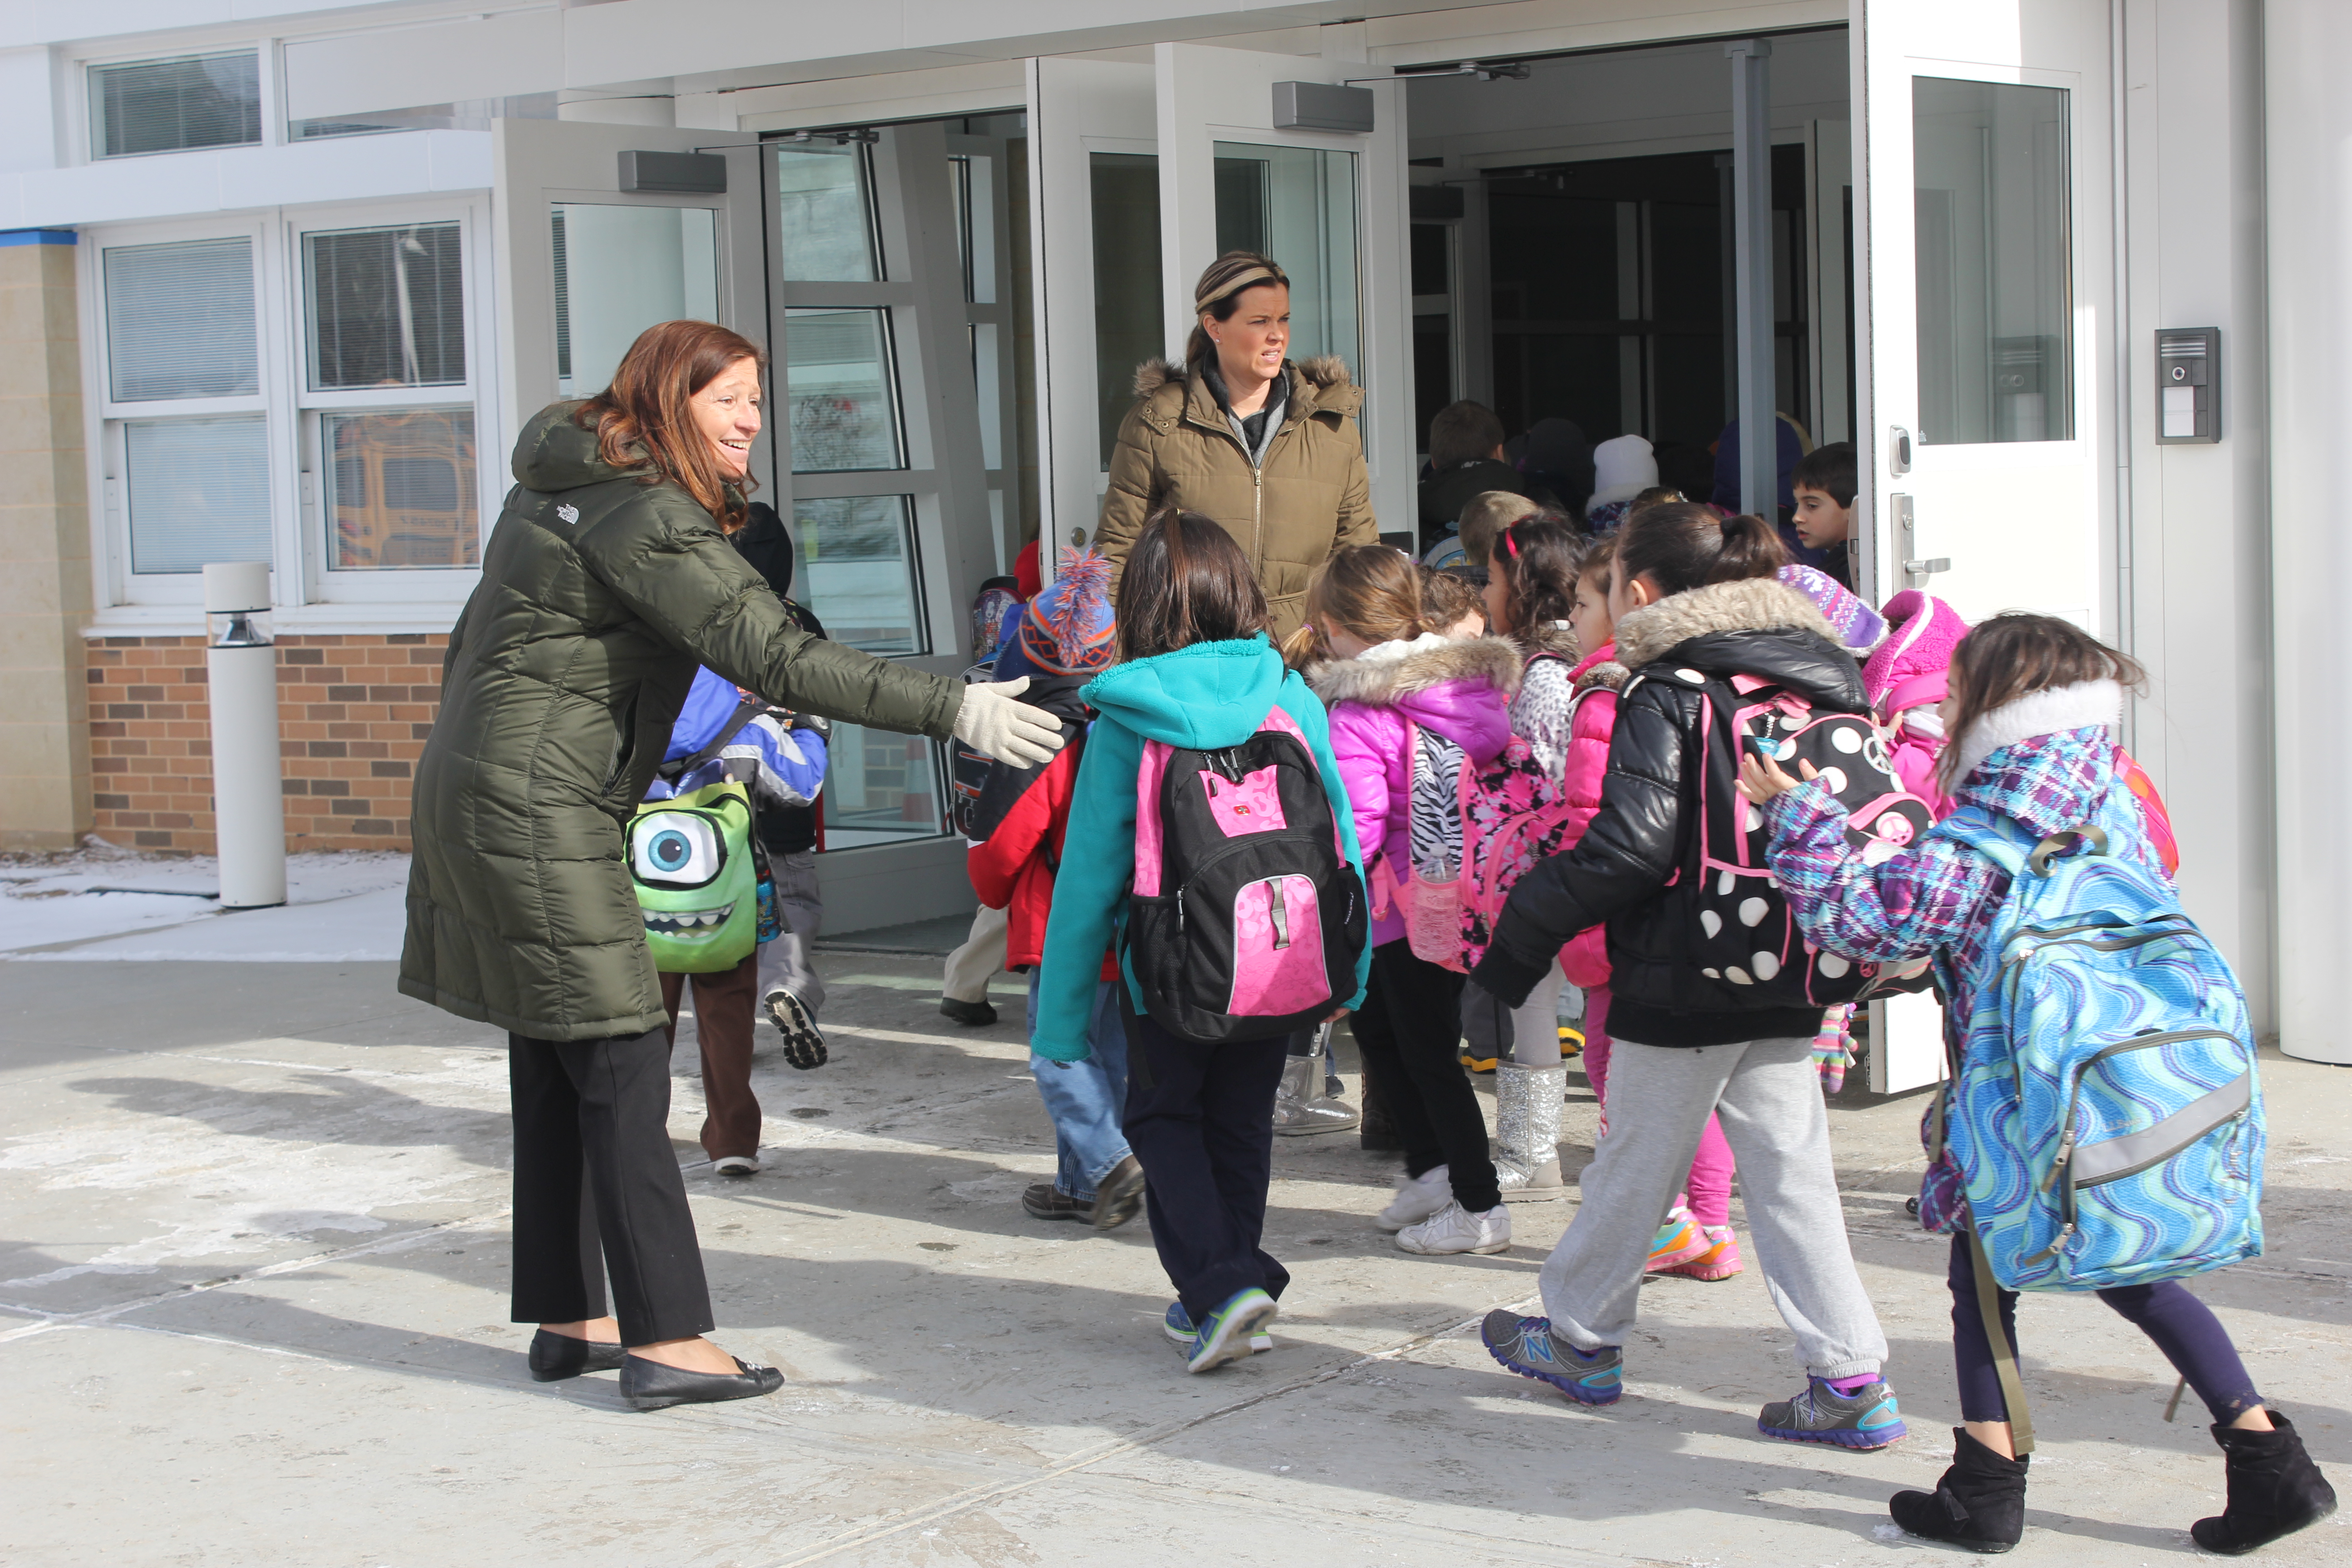 Karen Koliadko, principal of the Tuttle Avenue School, greets children as they arrive for their first week of classes in the new building. BY CAROL MORAN